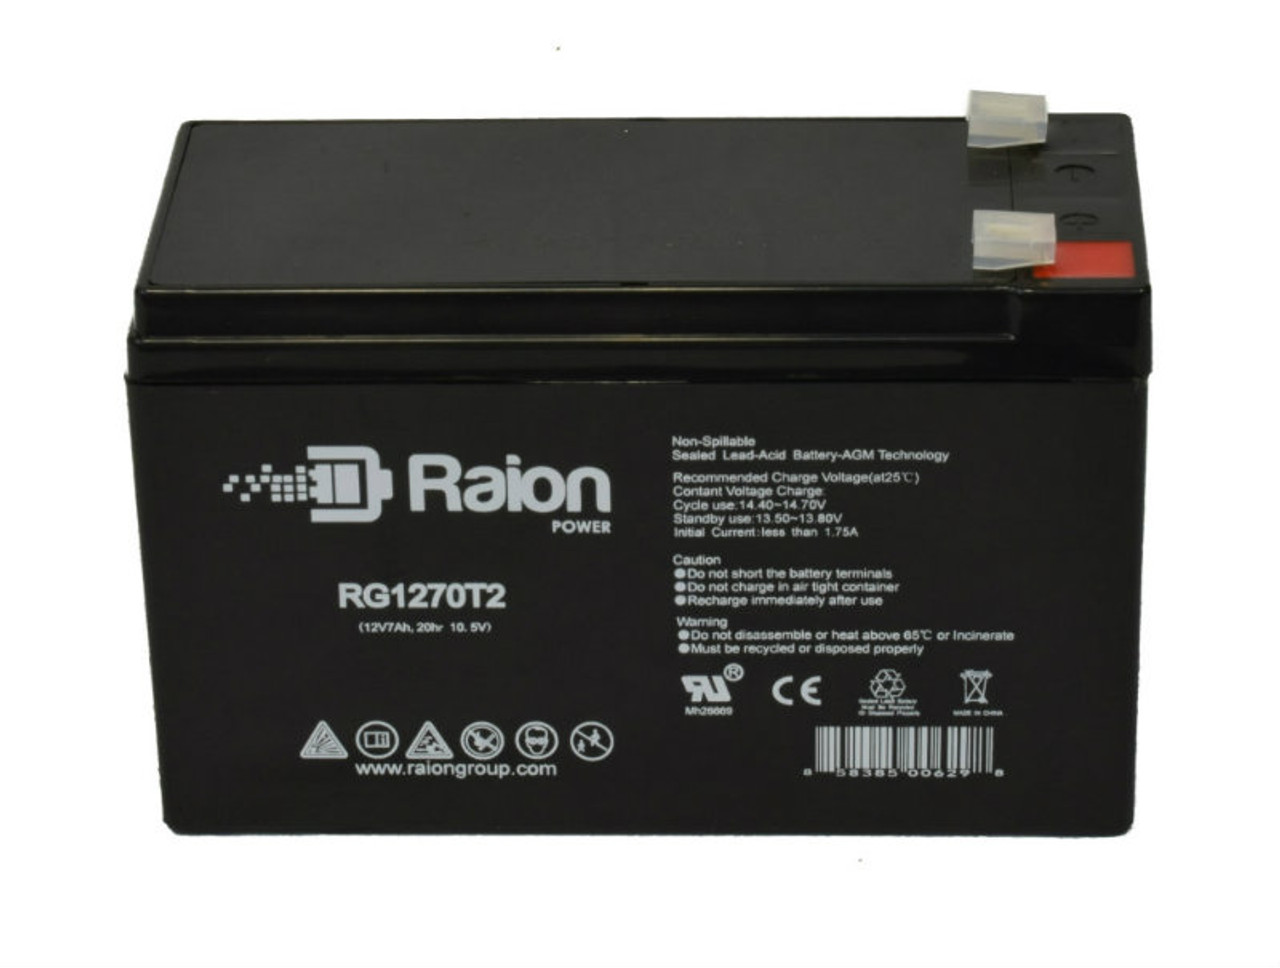 Raion Power RG1270T1 12V 7Ah Lead Acid Battery for Altronix SMP7PMCTXPD8